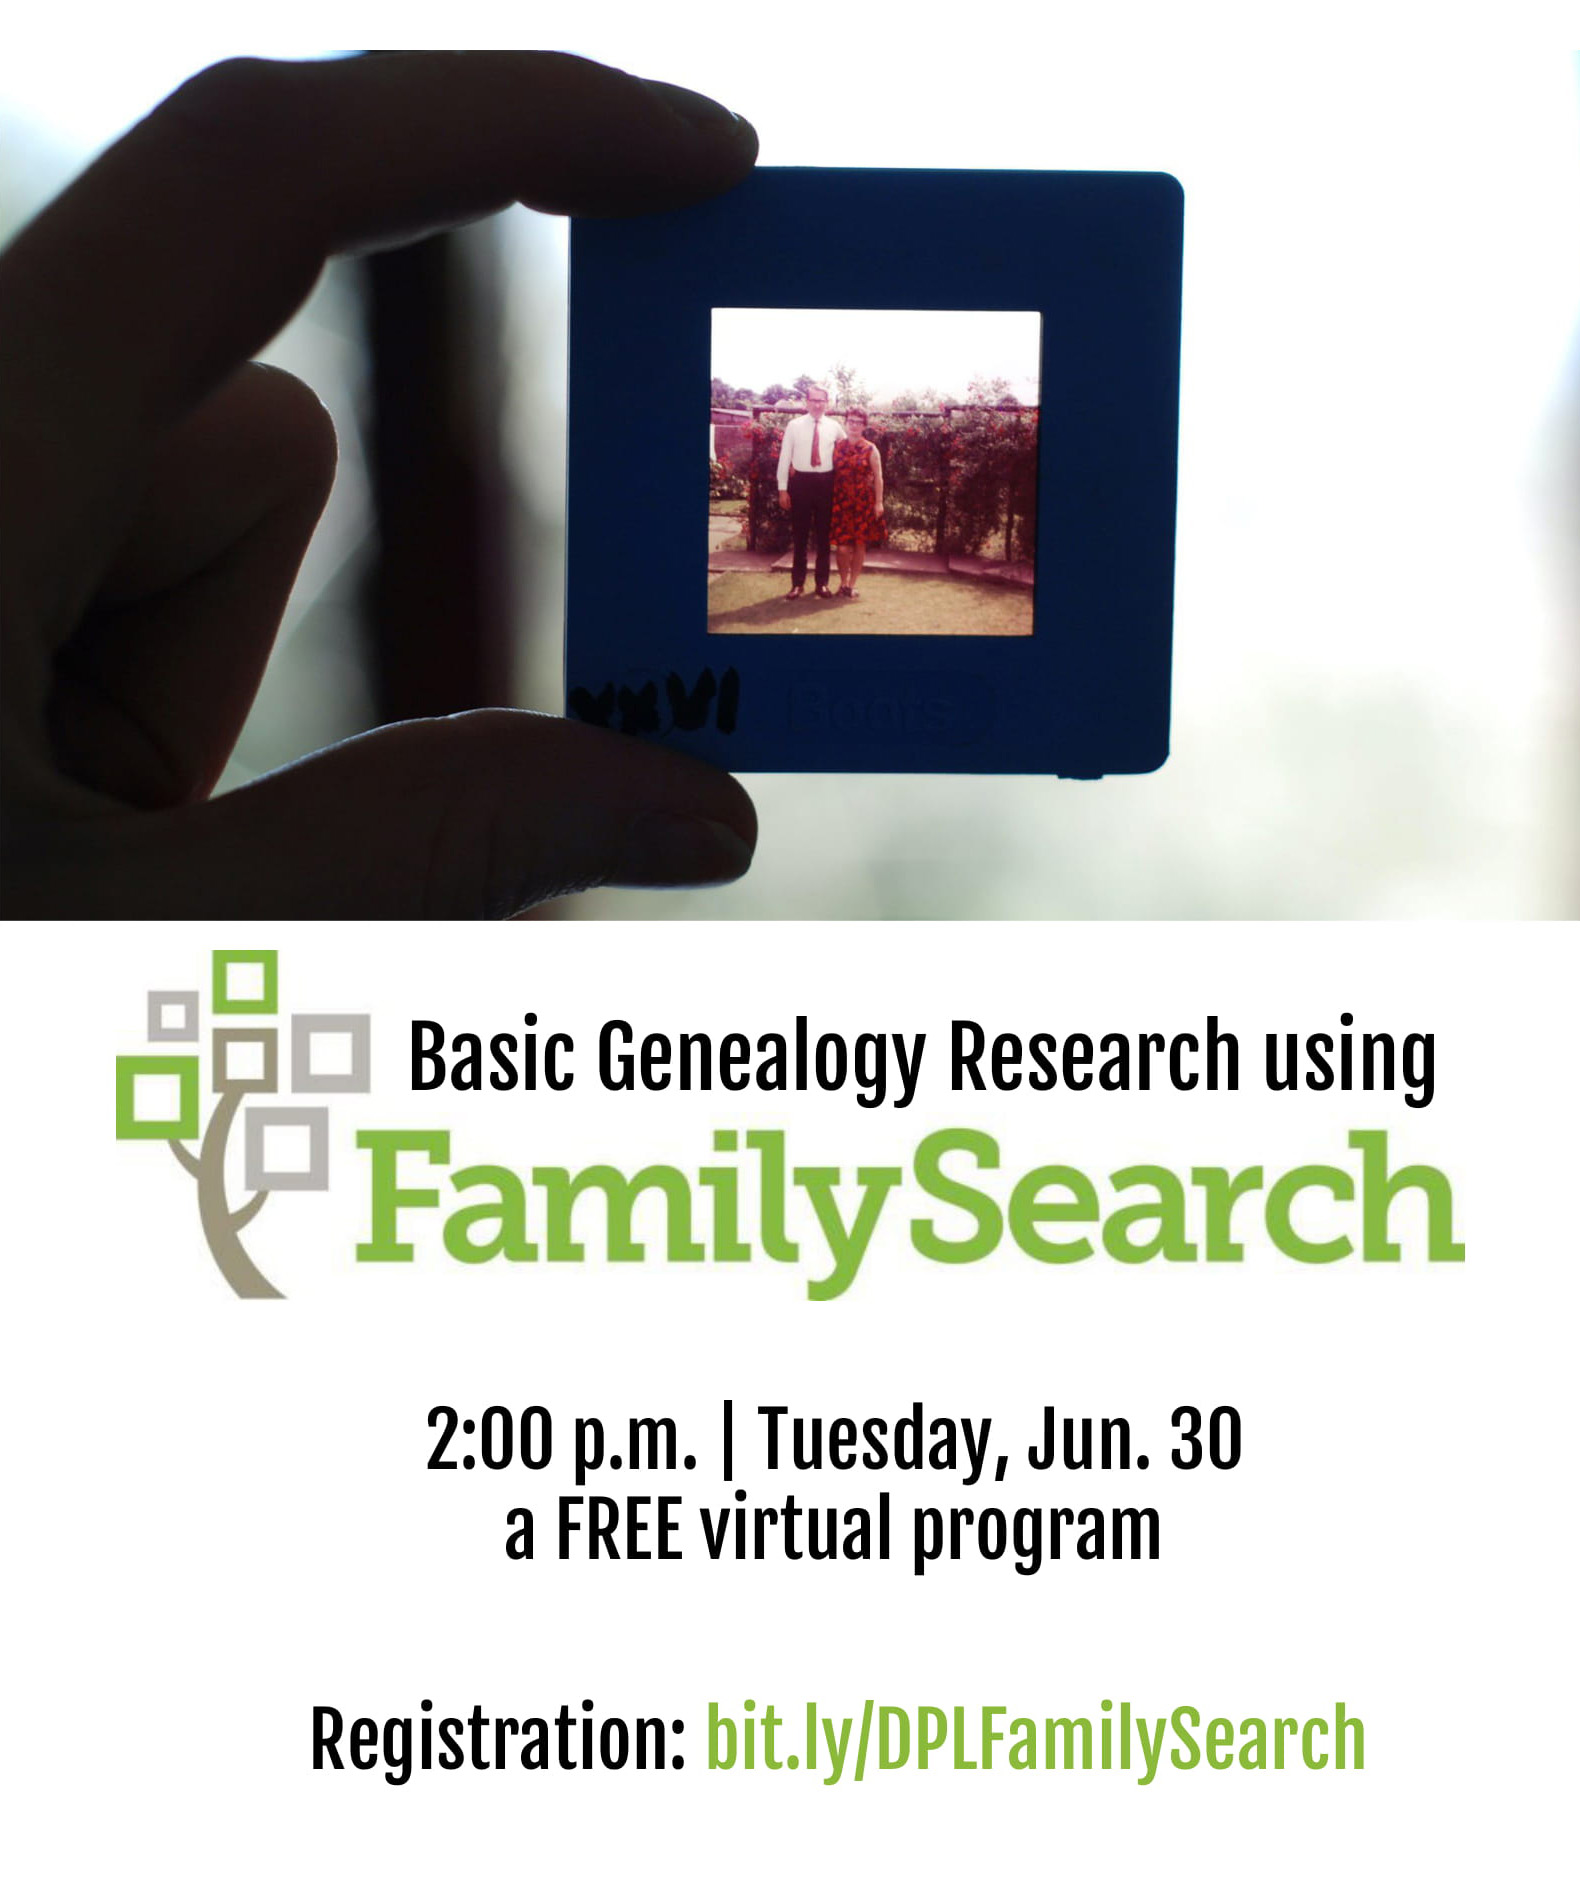 Basic Genealogy Research using FamilySearch